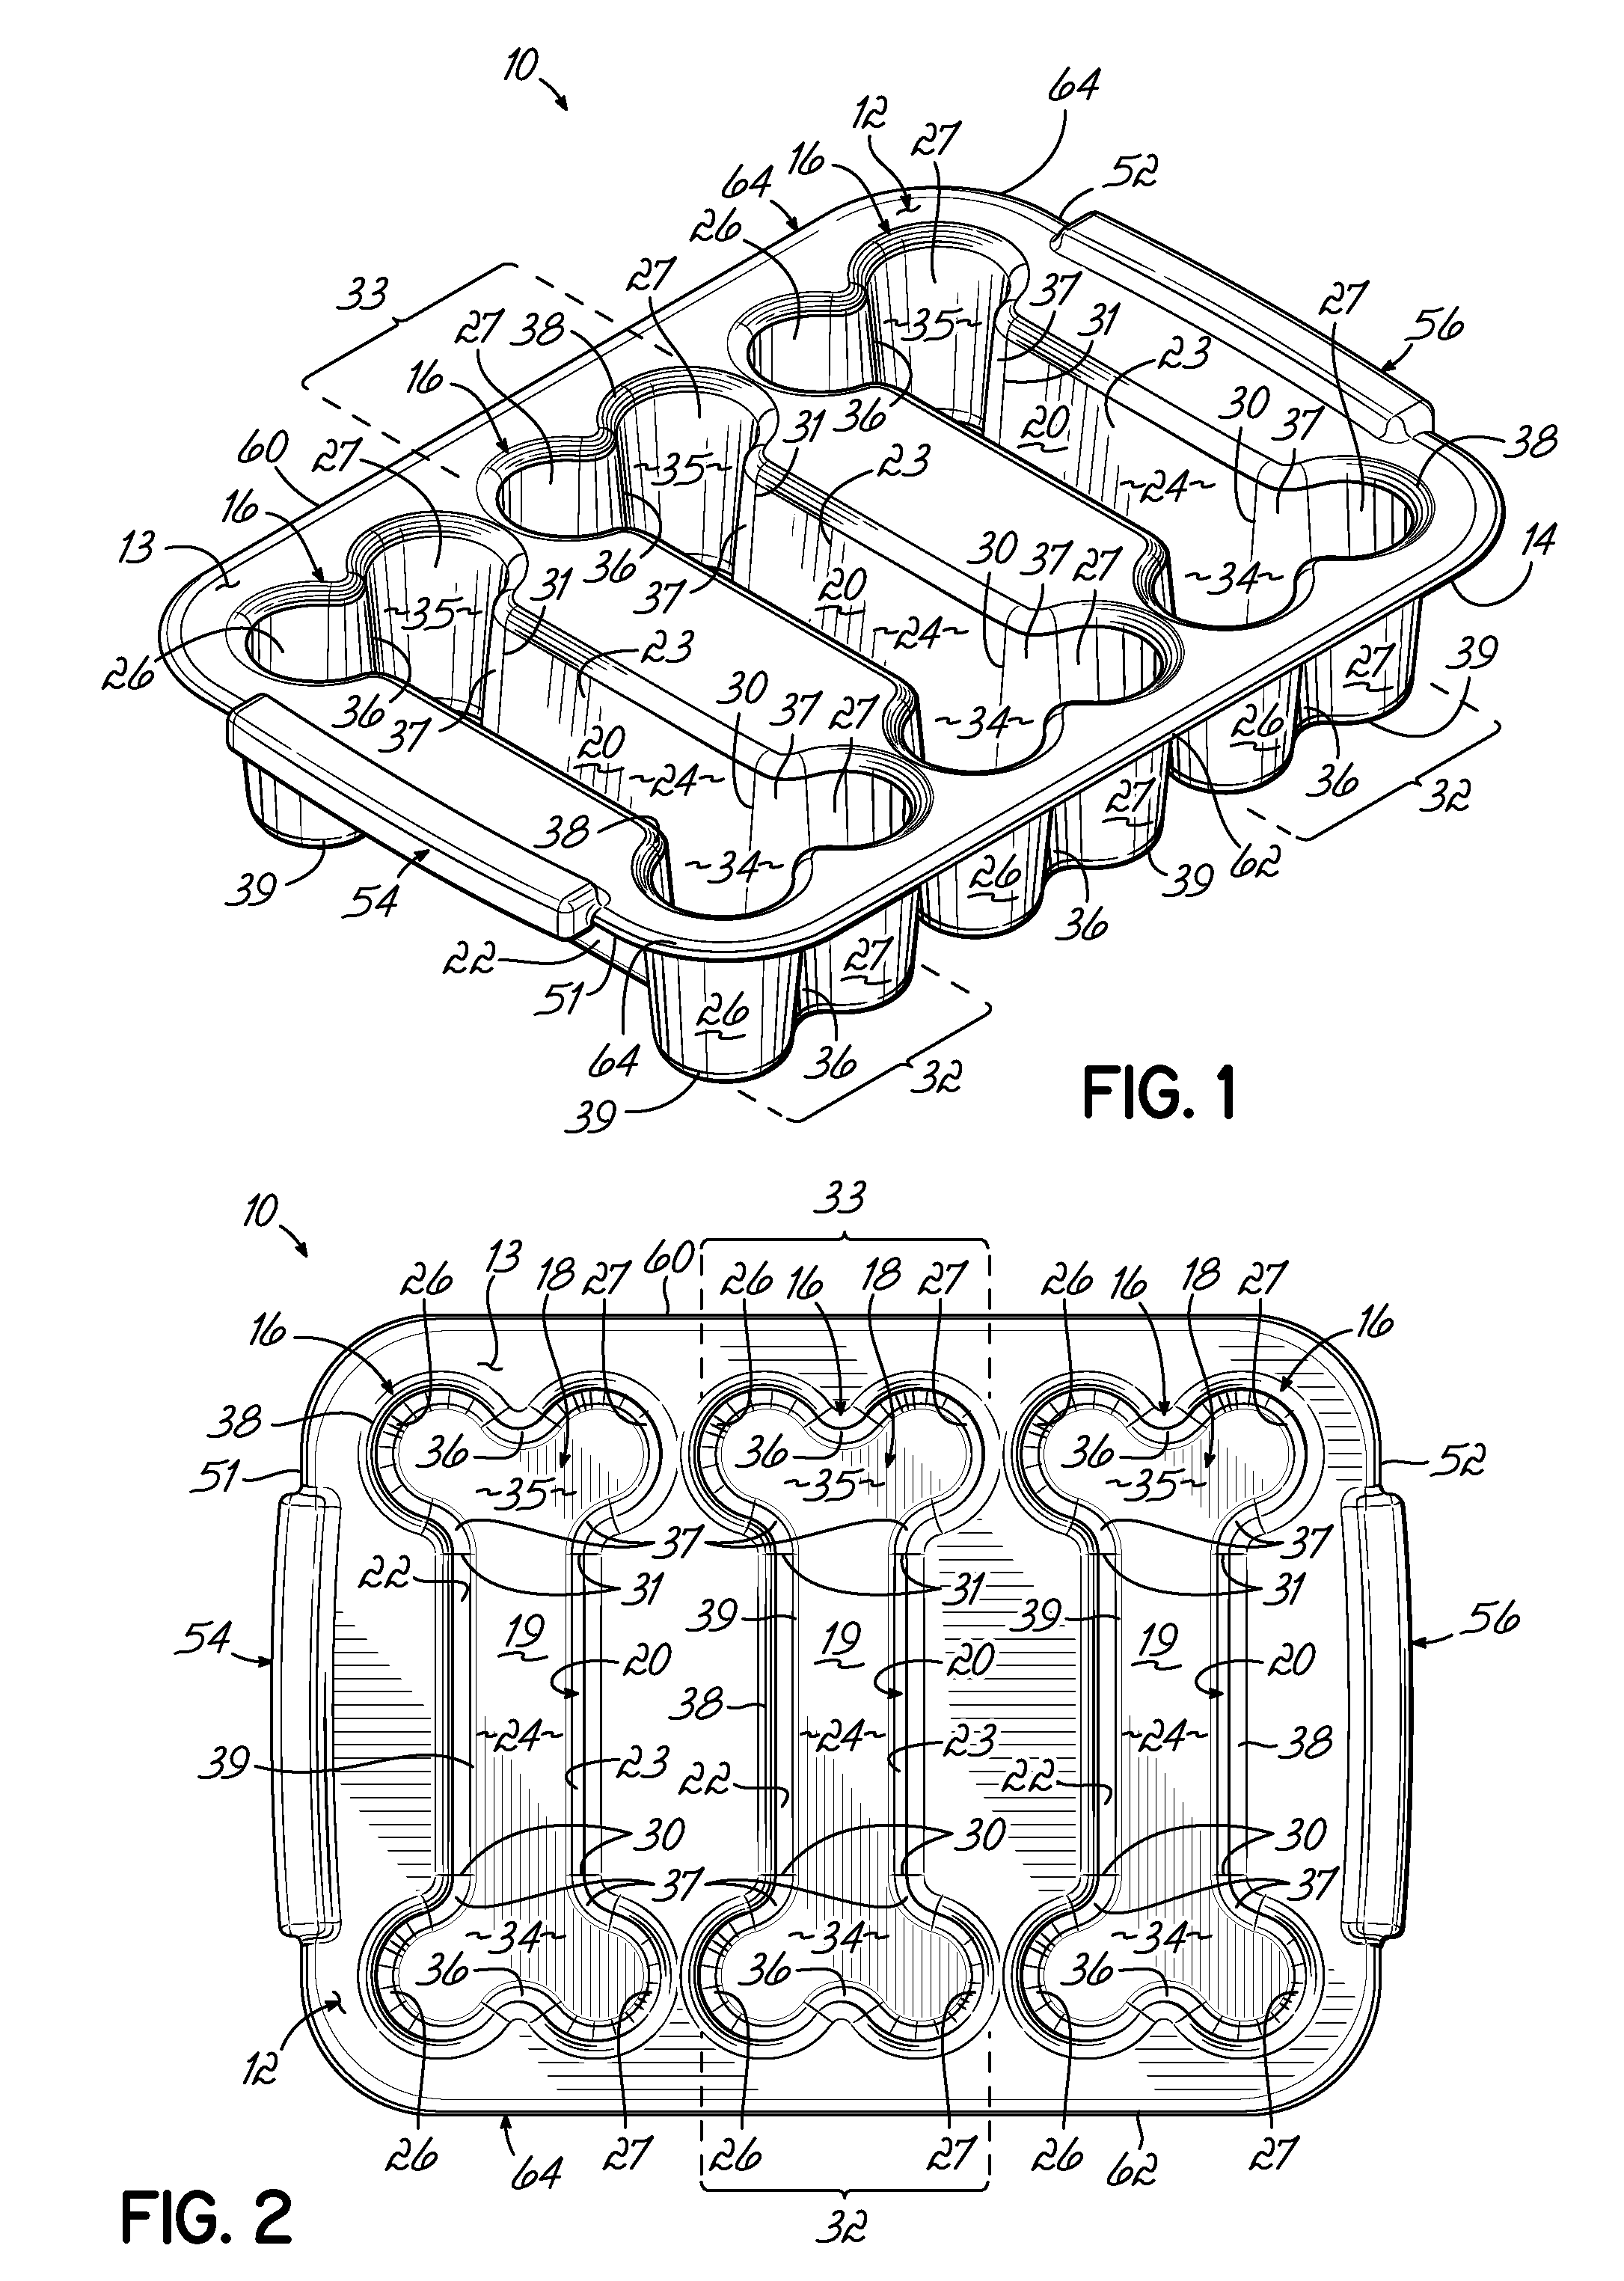 Microwaveable pet treat pan and method of preparing pet treat therewith